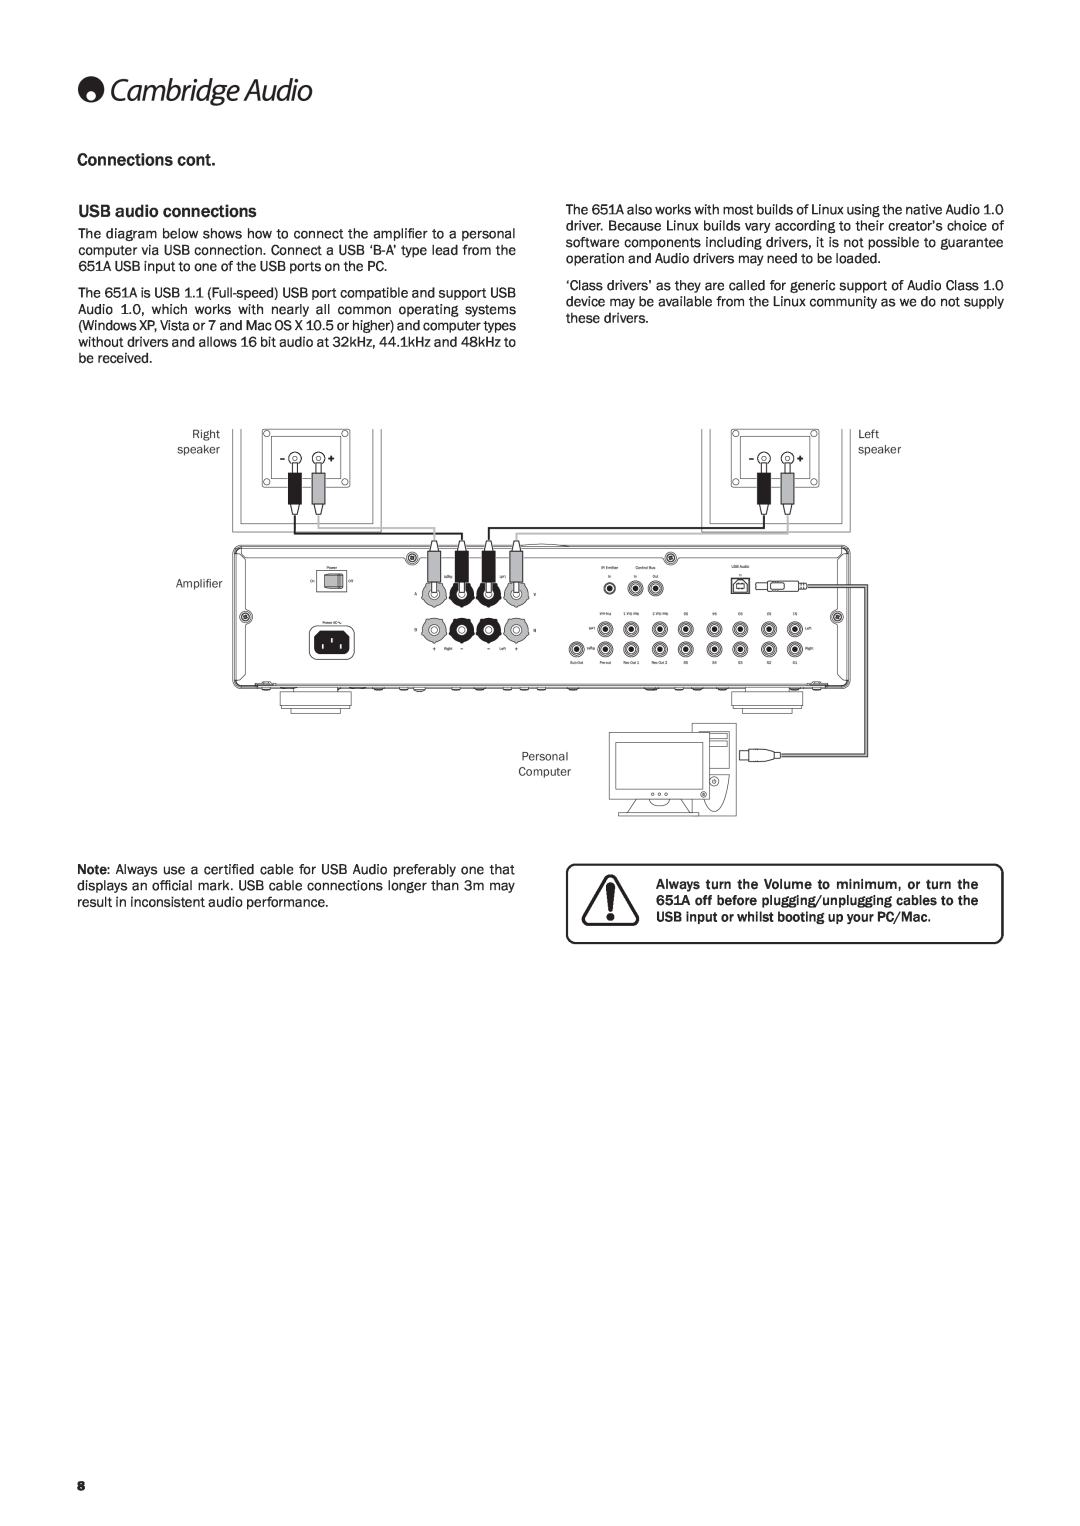 Cambridge Audio 651A user manual Connections cont USB audio connections, Right, speaker, Ampliﬁer, Left, Personal Computer 